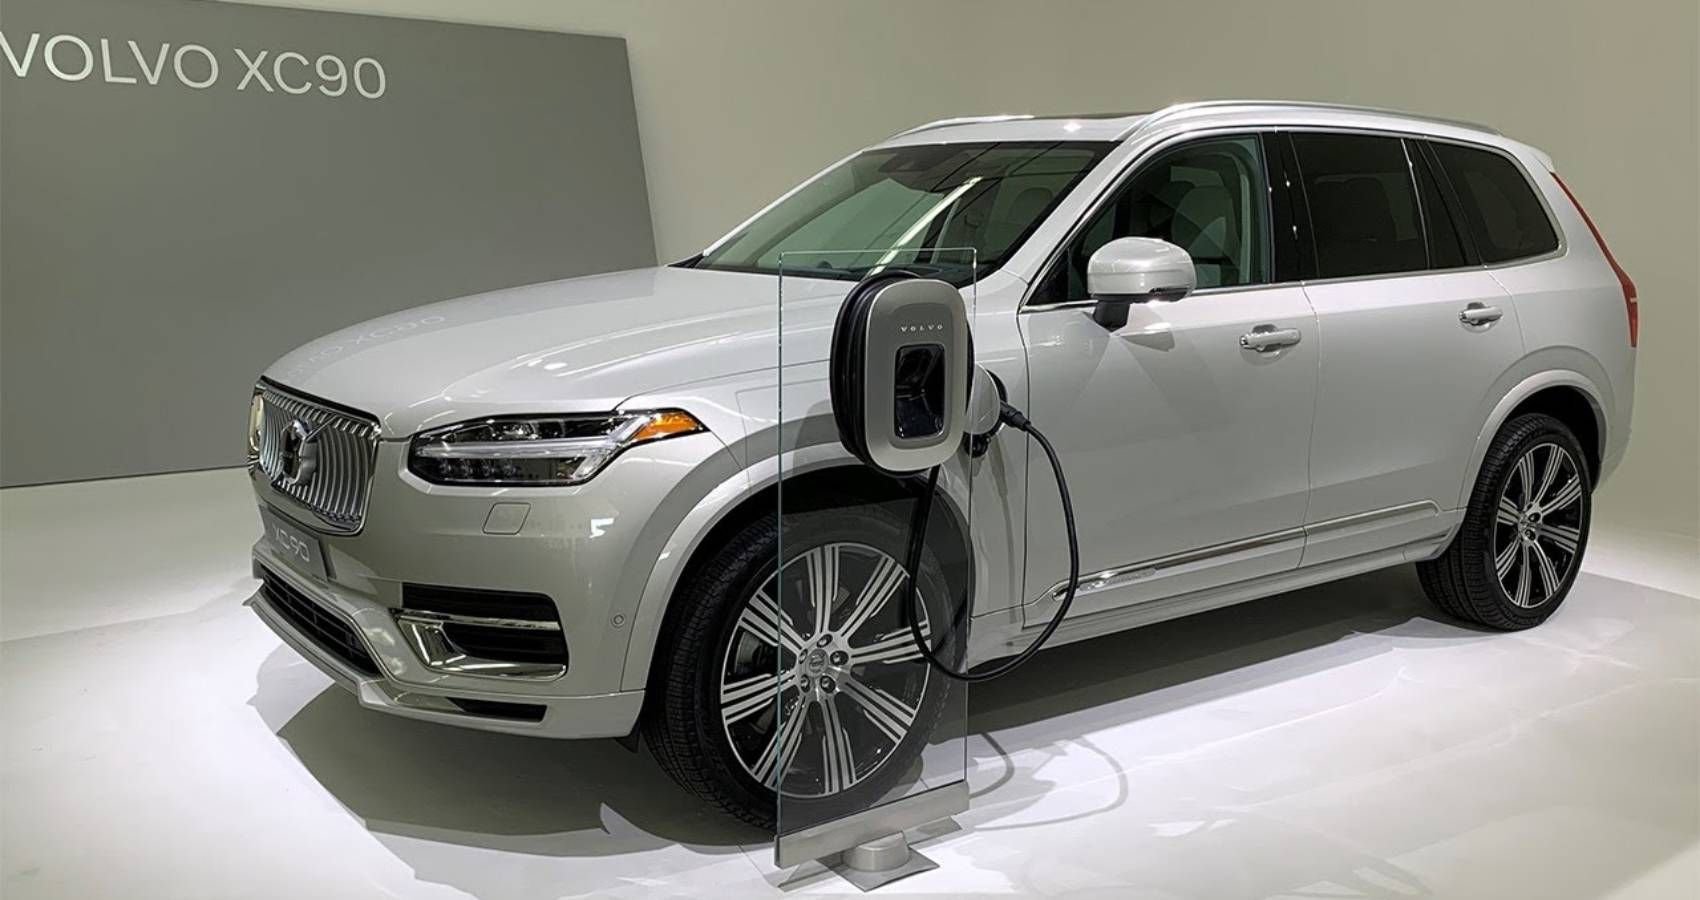 Here Is What We Know So Far About The 2022 Volvo XC90